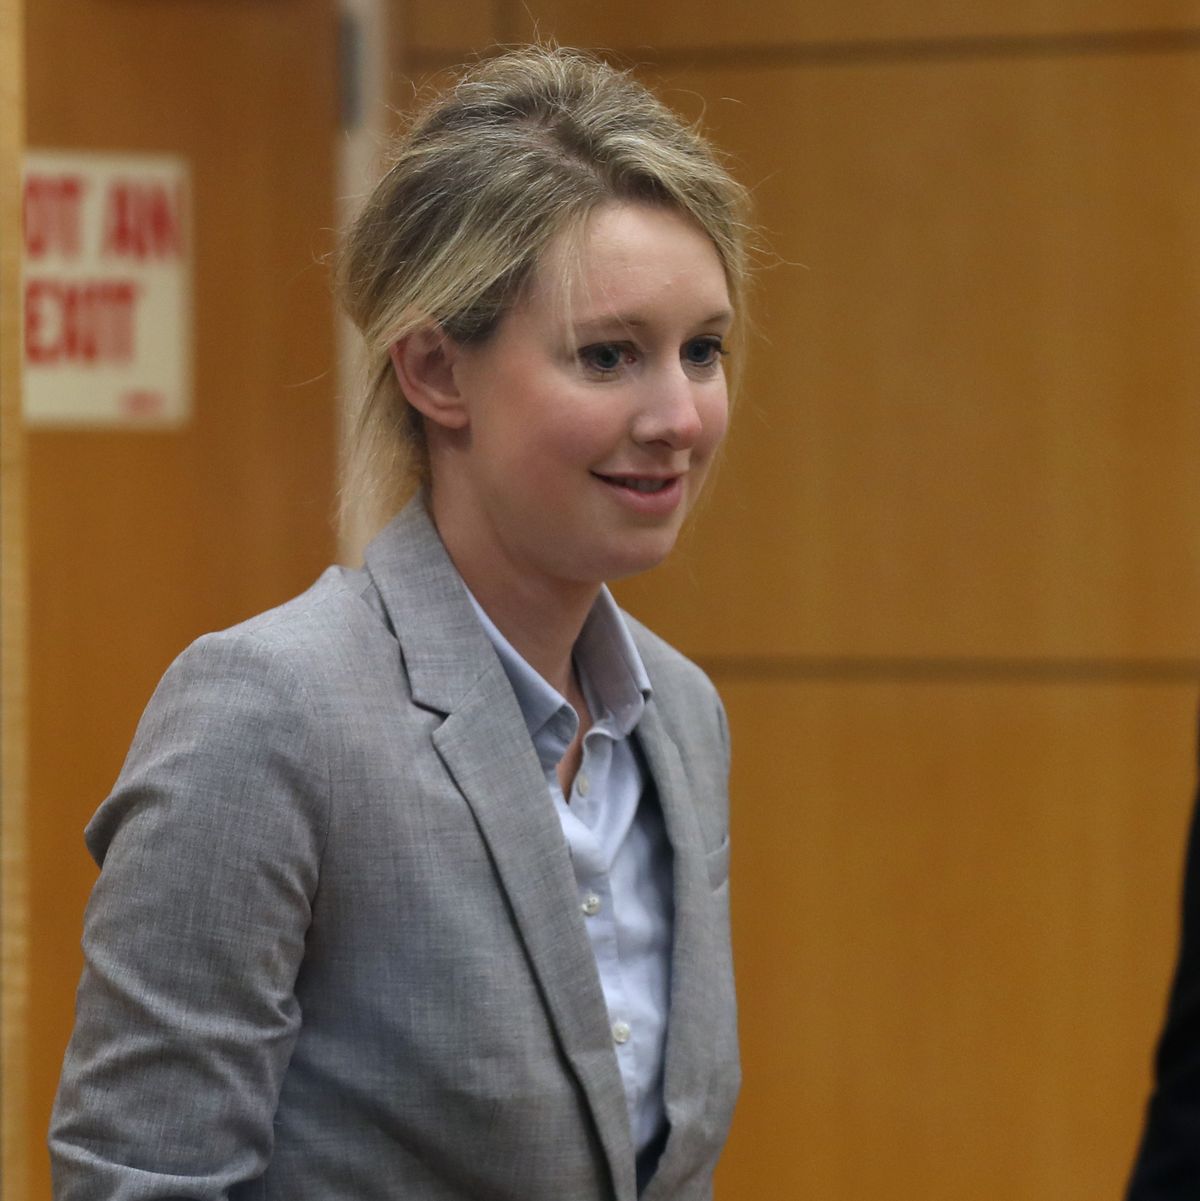 Theranos Founder Elizabeth Holmes Appears In Court For Status Hearing